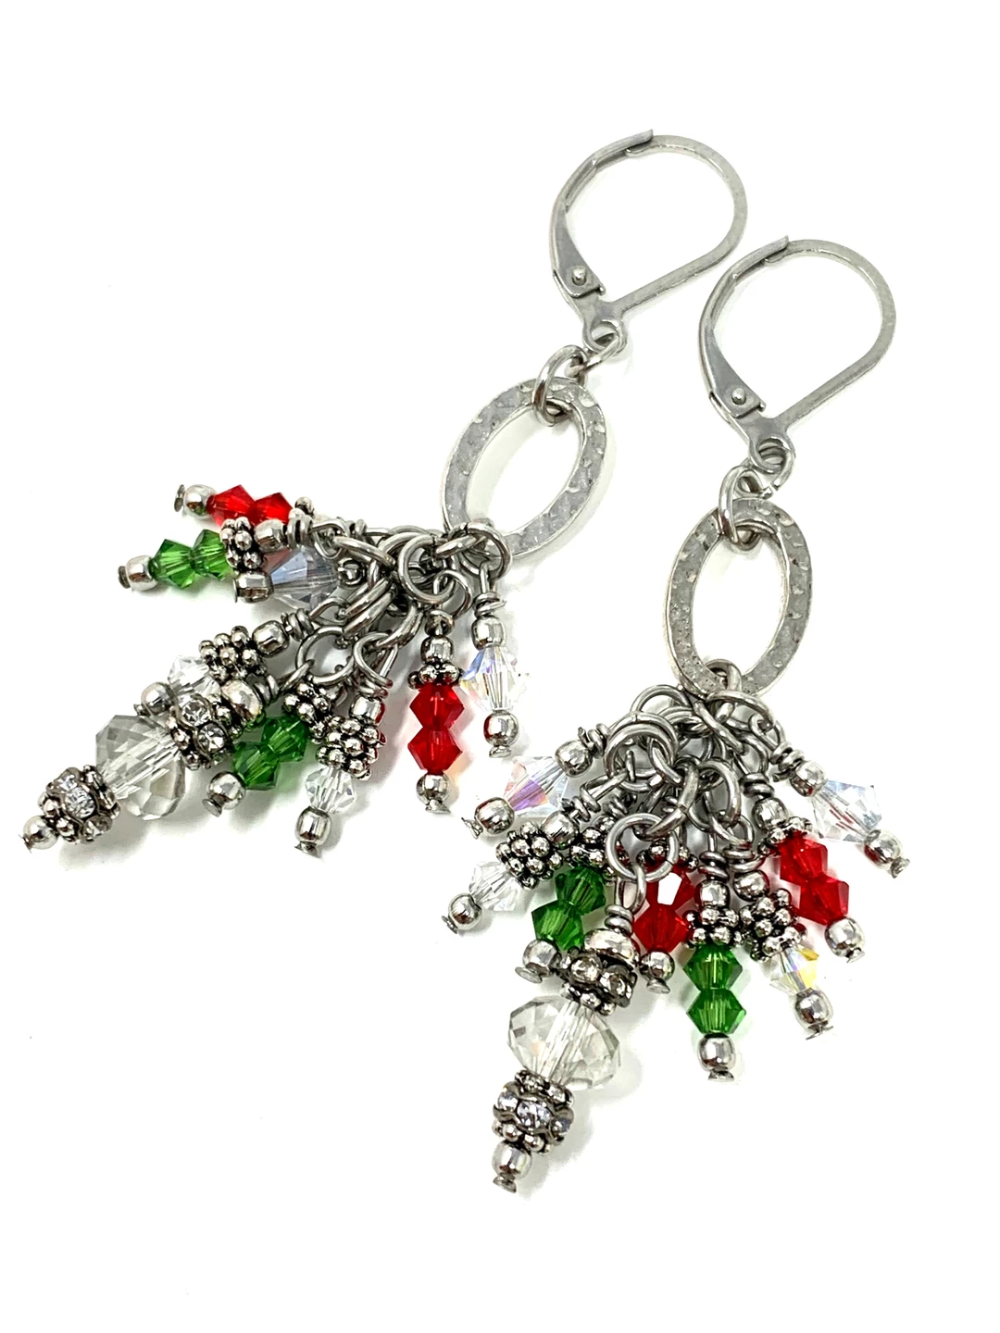 Beaded Earrings from Bead Dangle Design are Hand-Crafted -   14 holiday Design swarovski crystals ideas